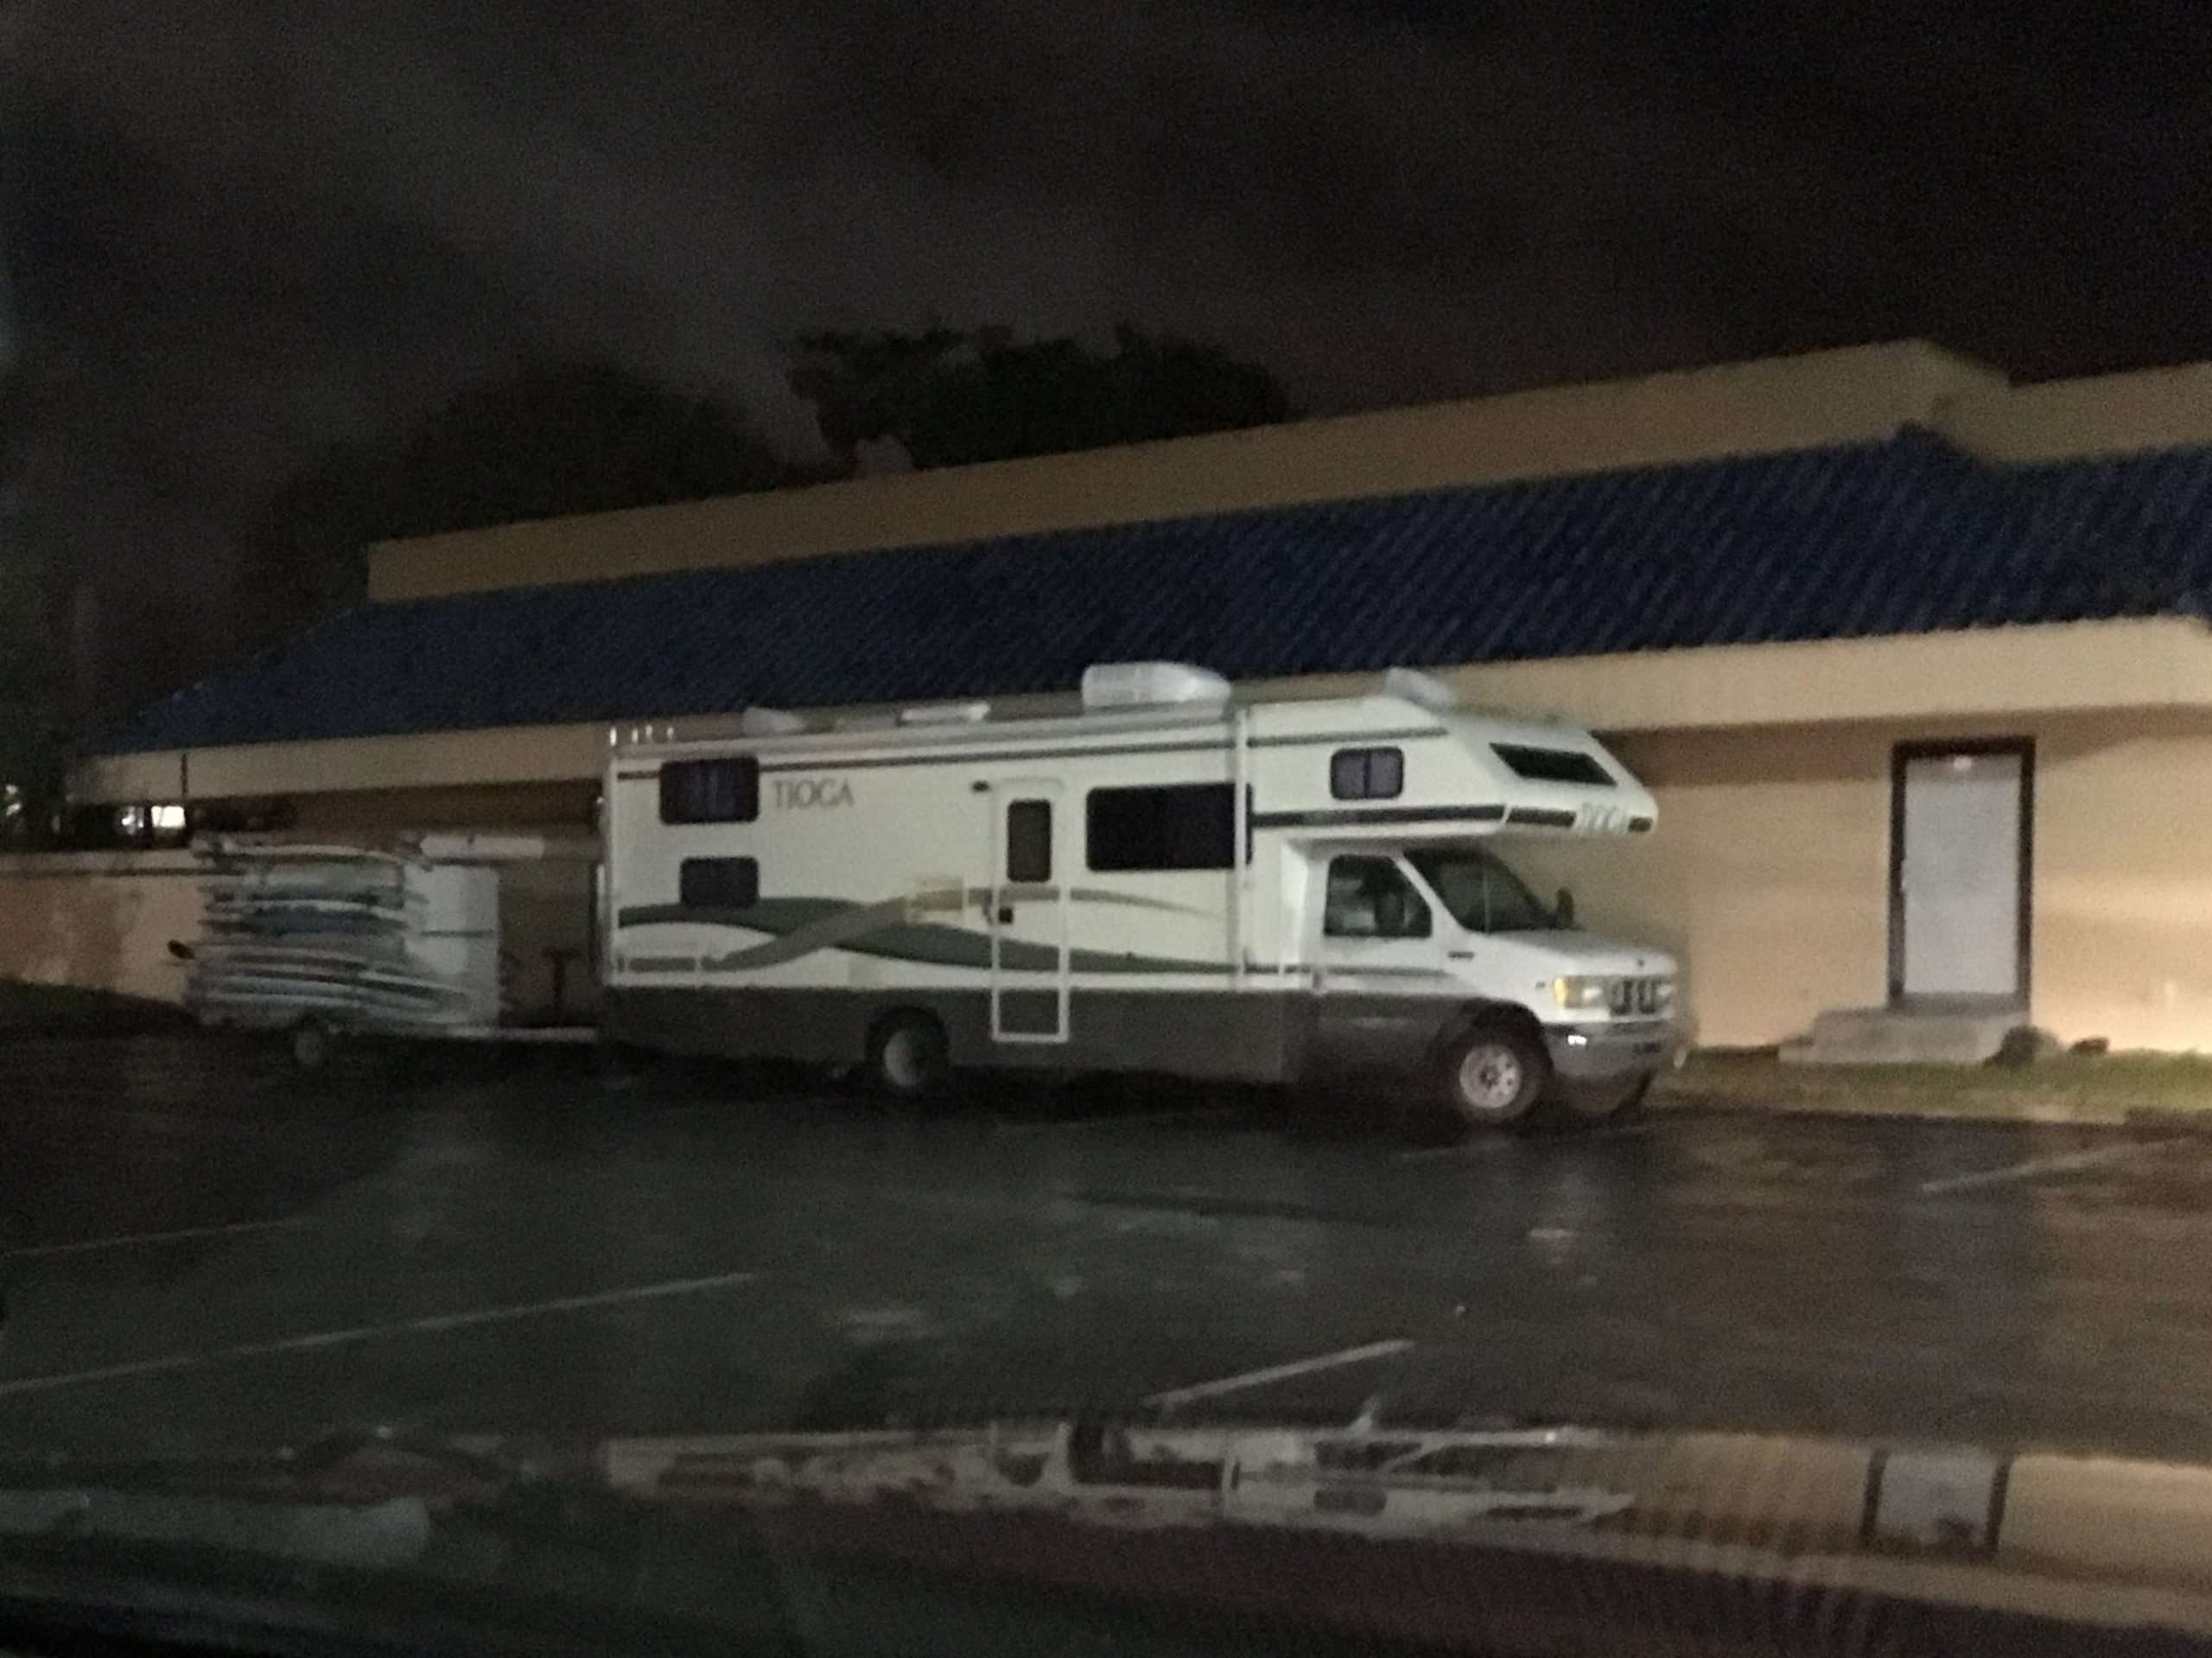 RV parked in parking lot at night